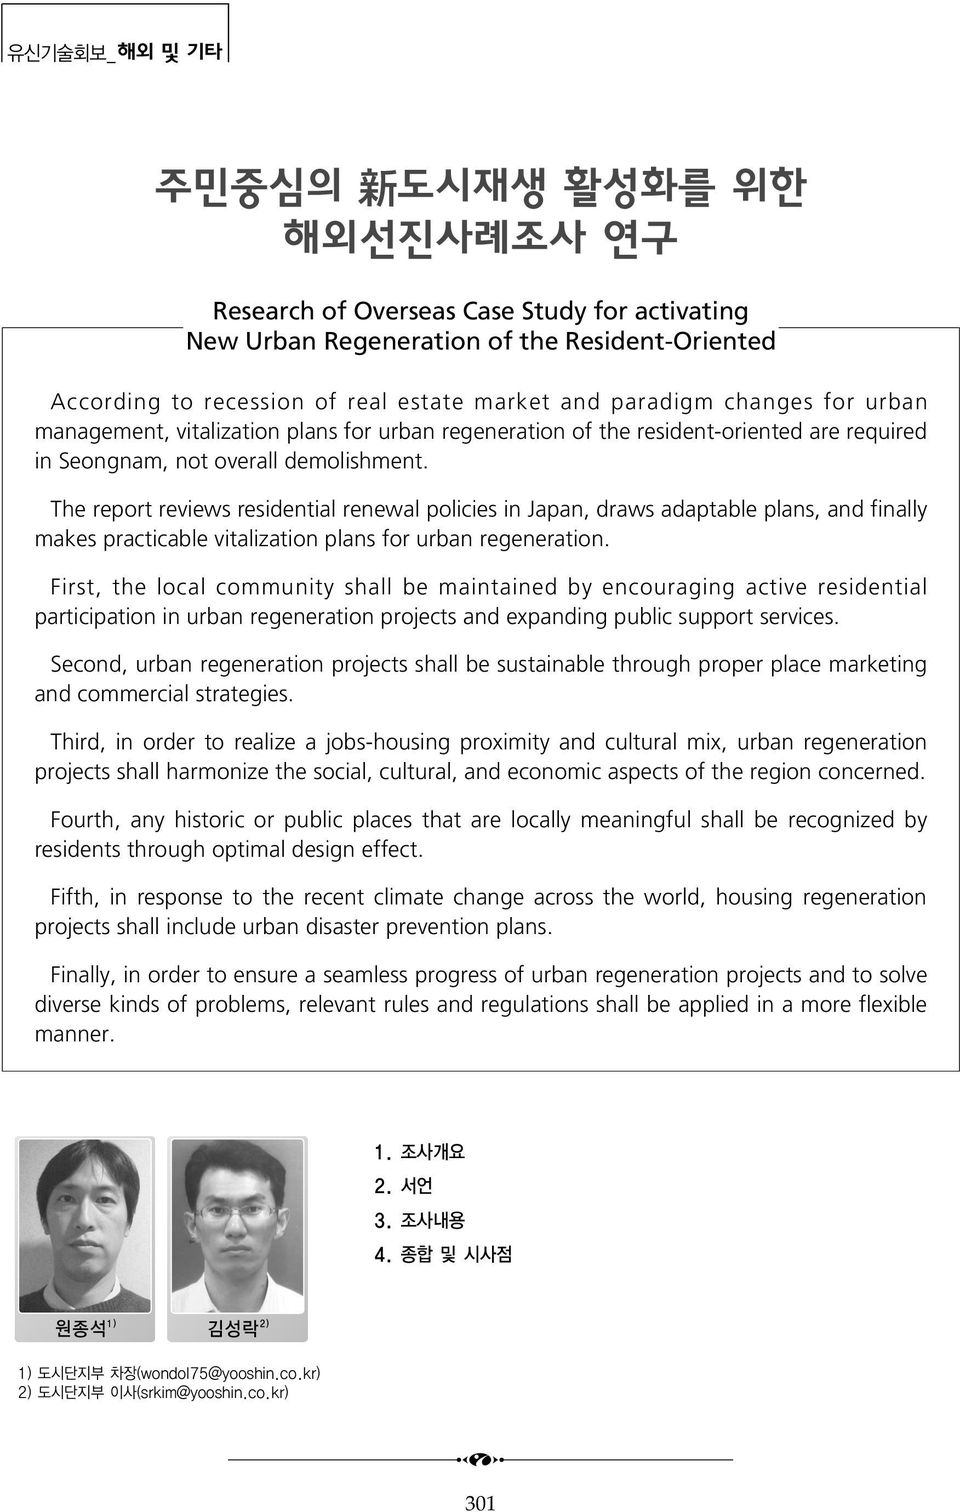 The report reviews residential renewal policies in Japan, draws adaptable plans, and finally makes practicable vitalization plans for urban regeneration.